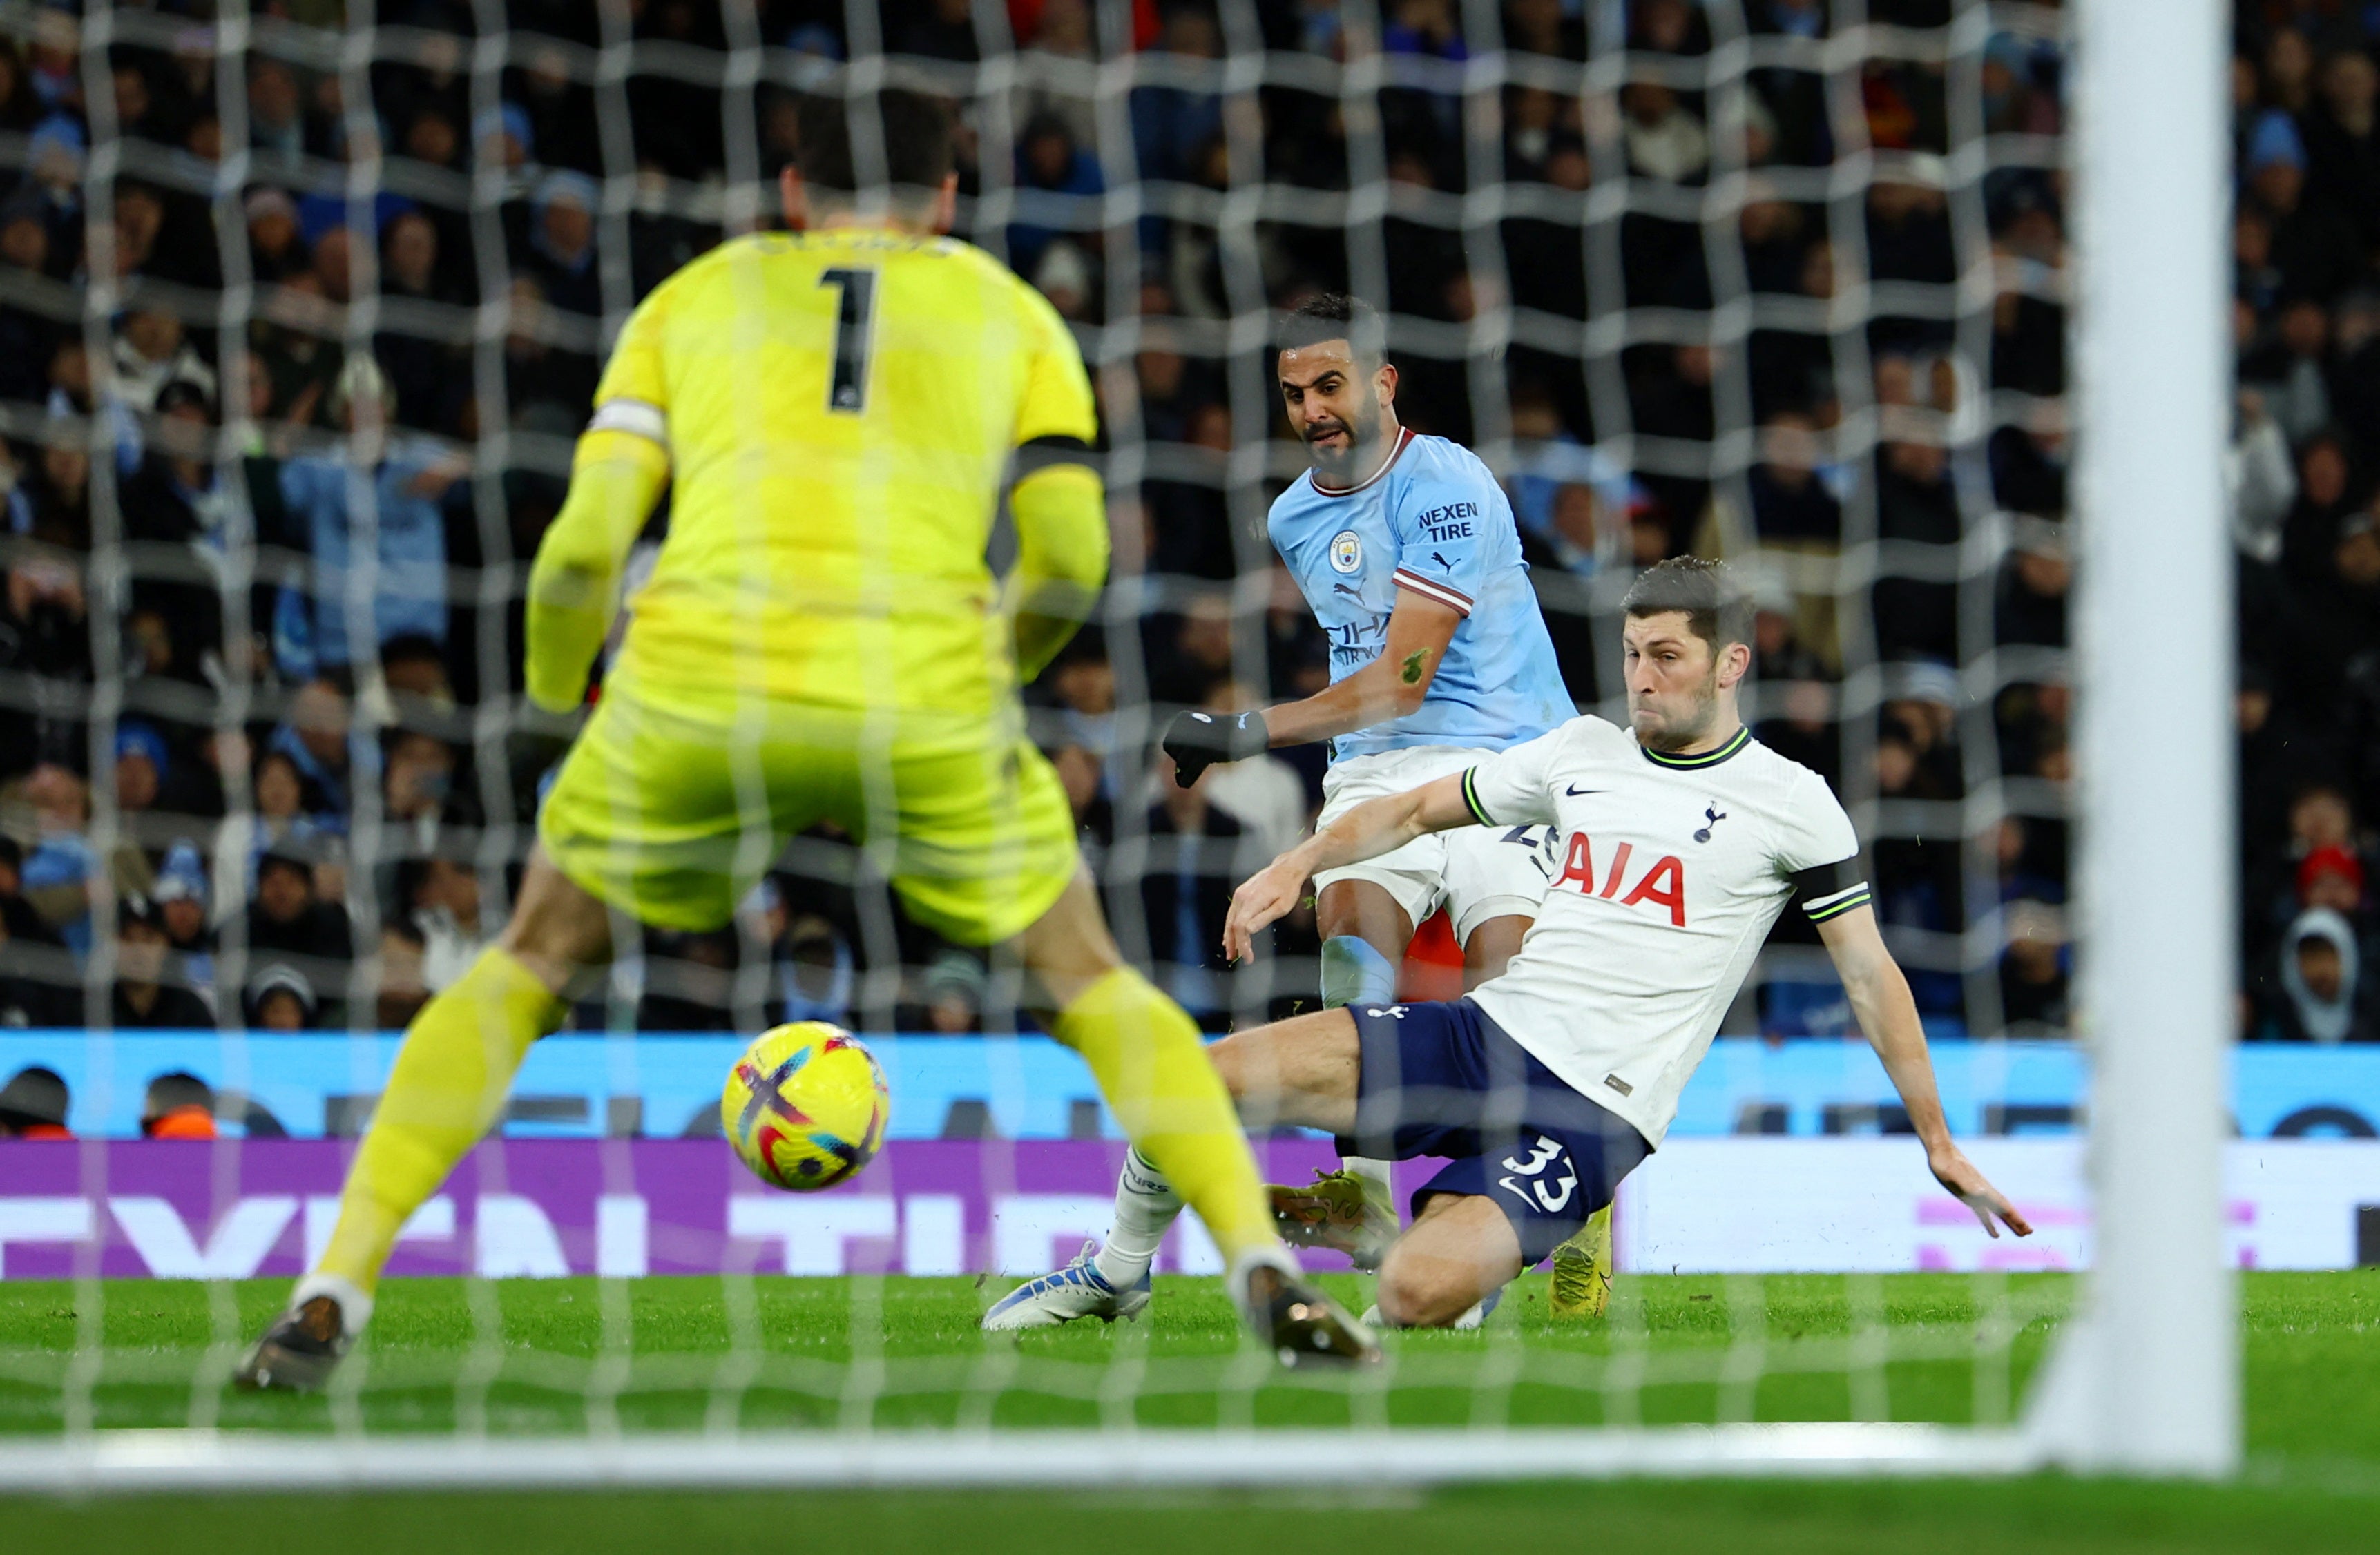 Man City vs Tottenham LIVE Premier League result and final score tonight The Independent